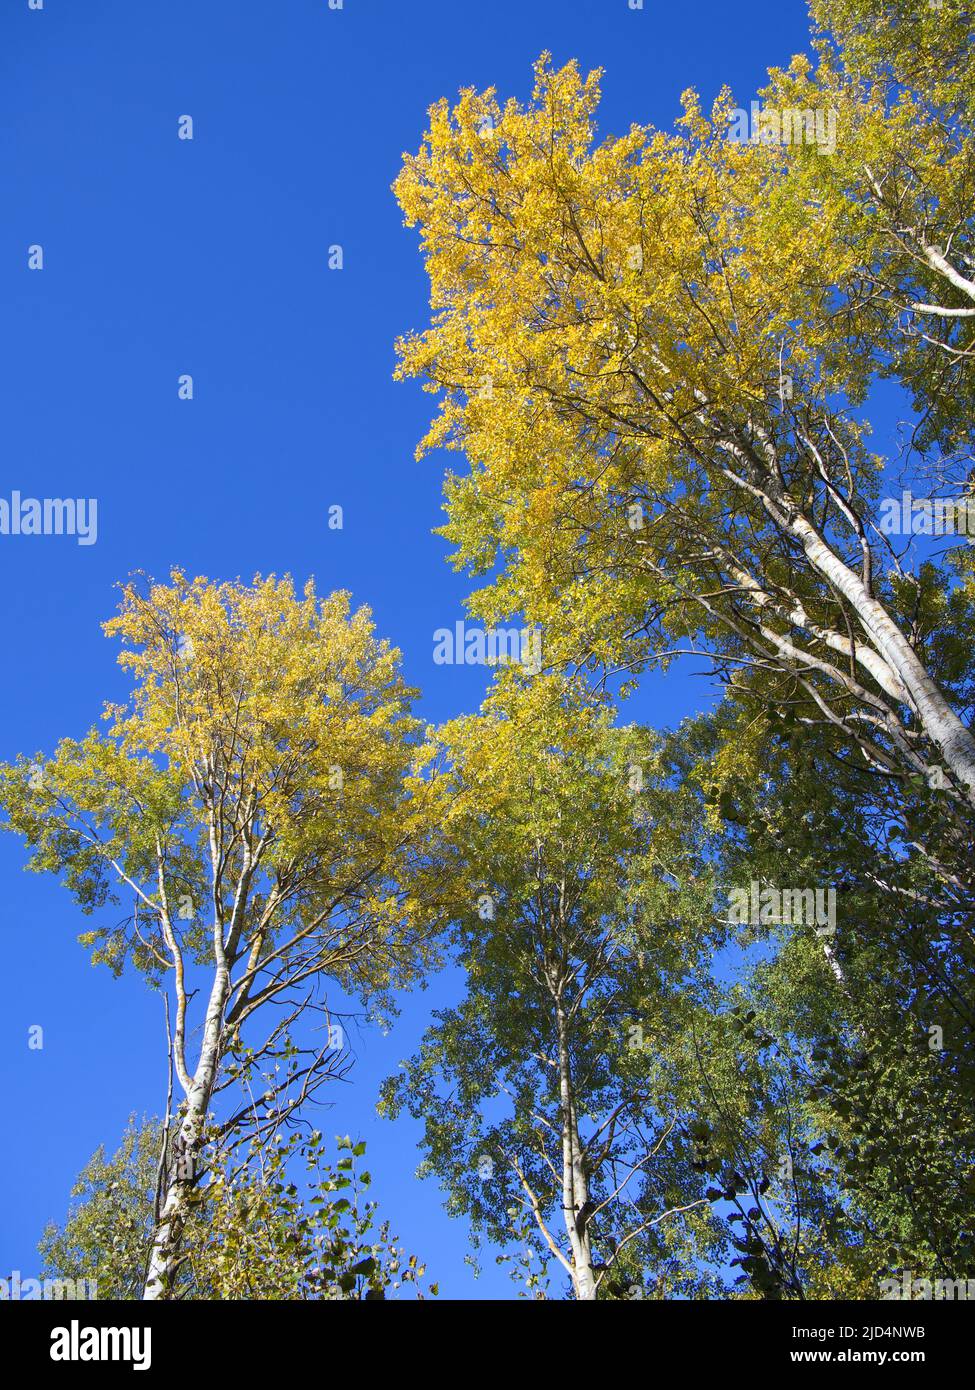 aspen trees durning the autumn season when the leaves change colour from green t bright vibrant orange and yellow as the season comes to an end on a b Stock Photo